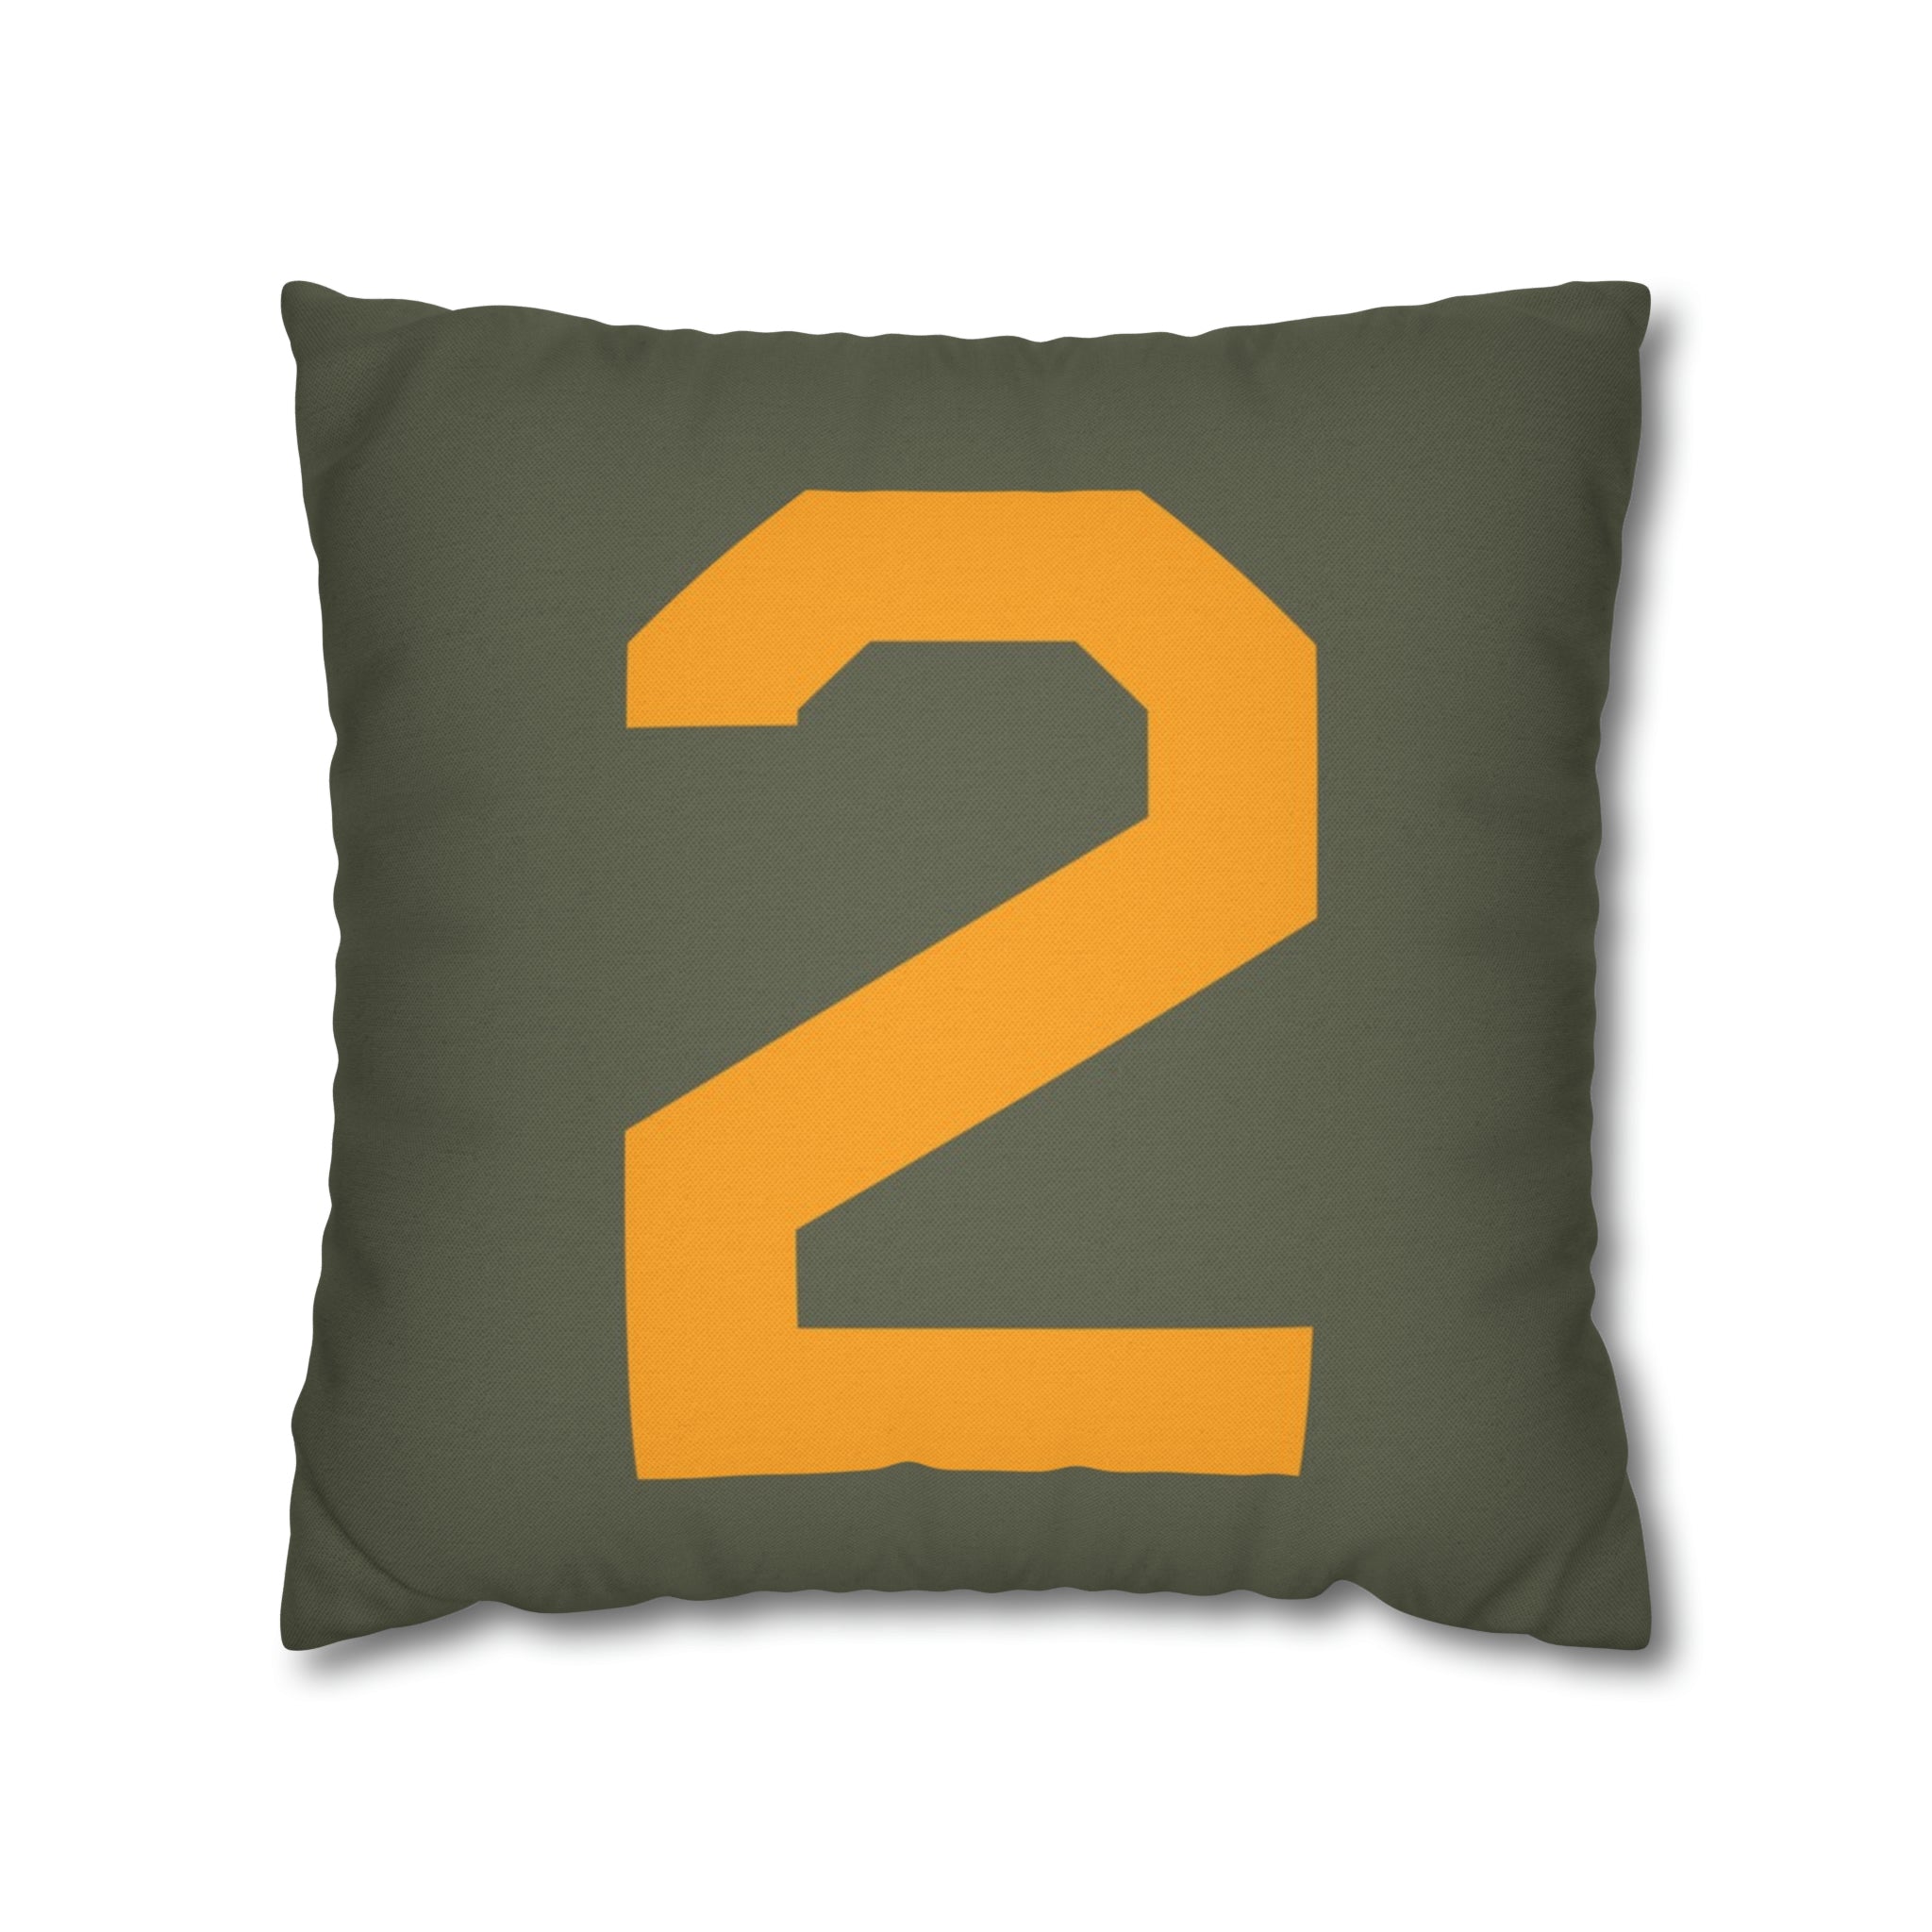 WWII USAAF Number "2" Square Pillowcase (Style A) - I Love a Hangar